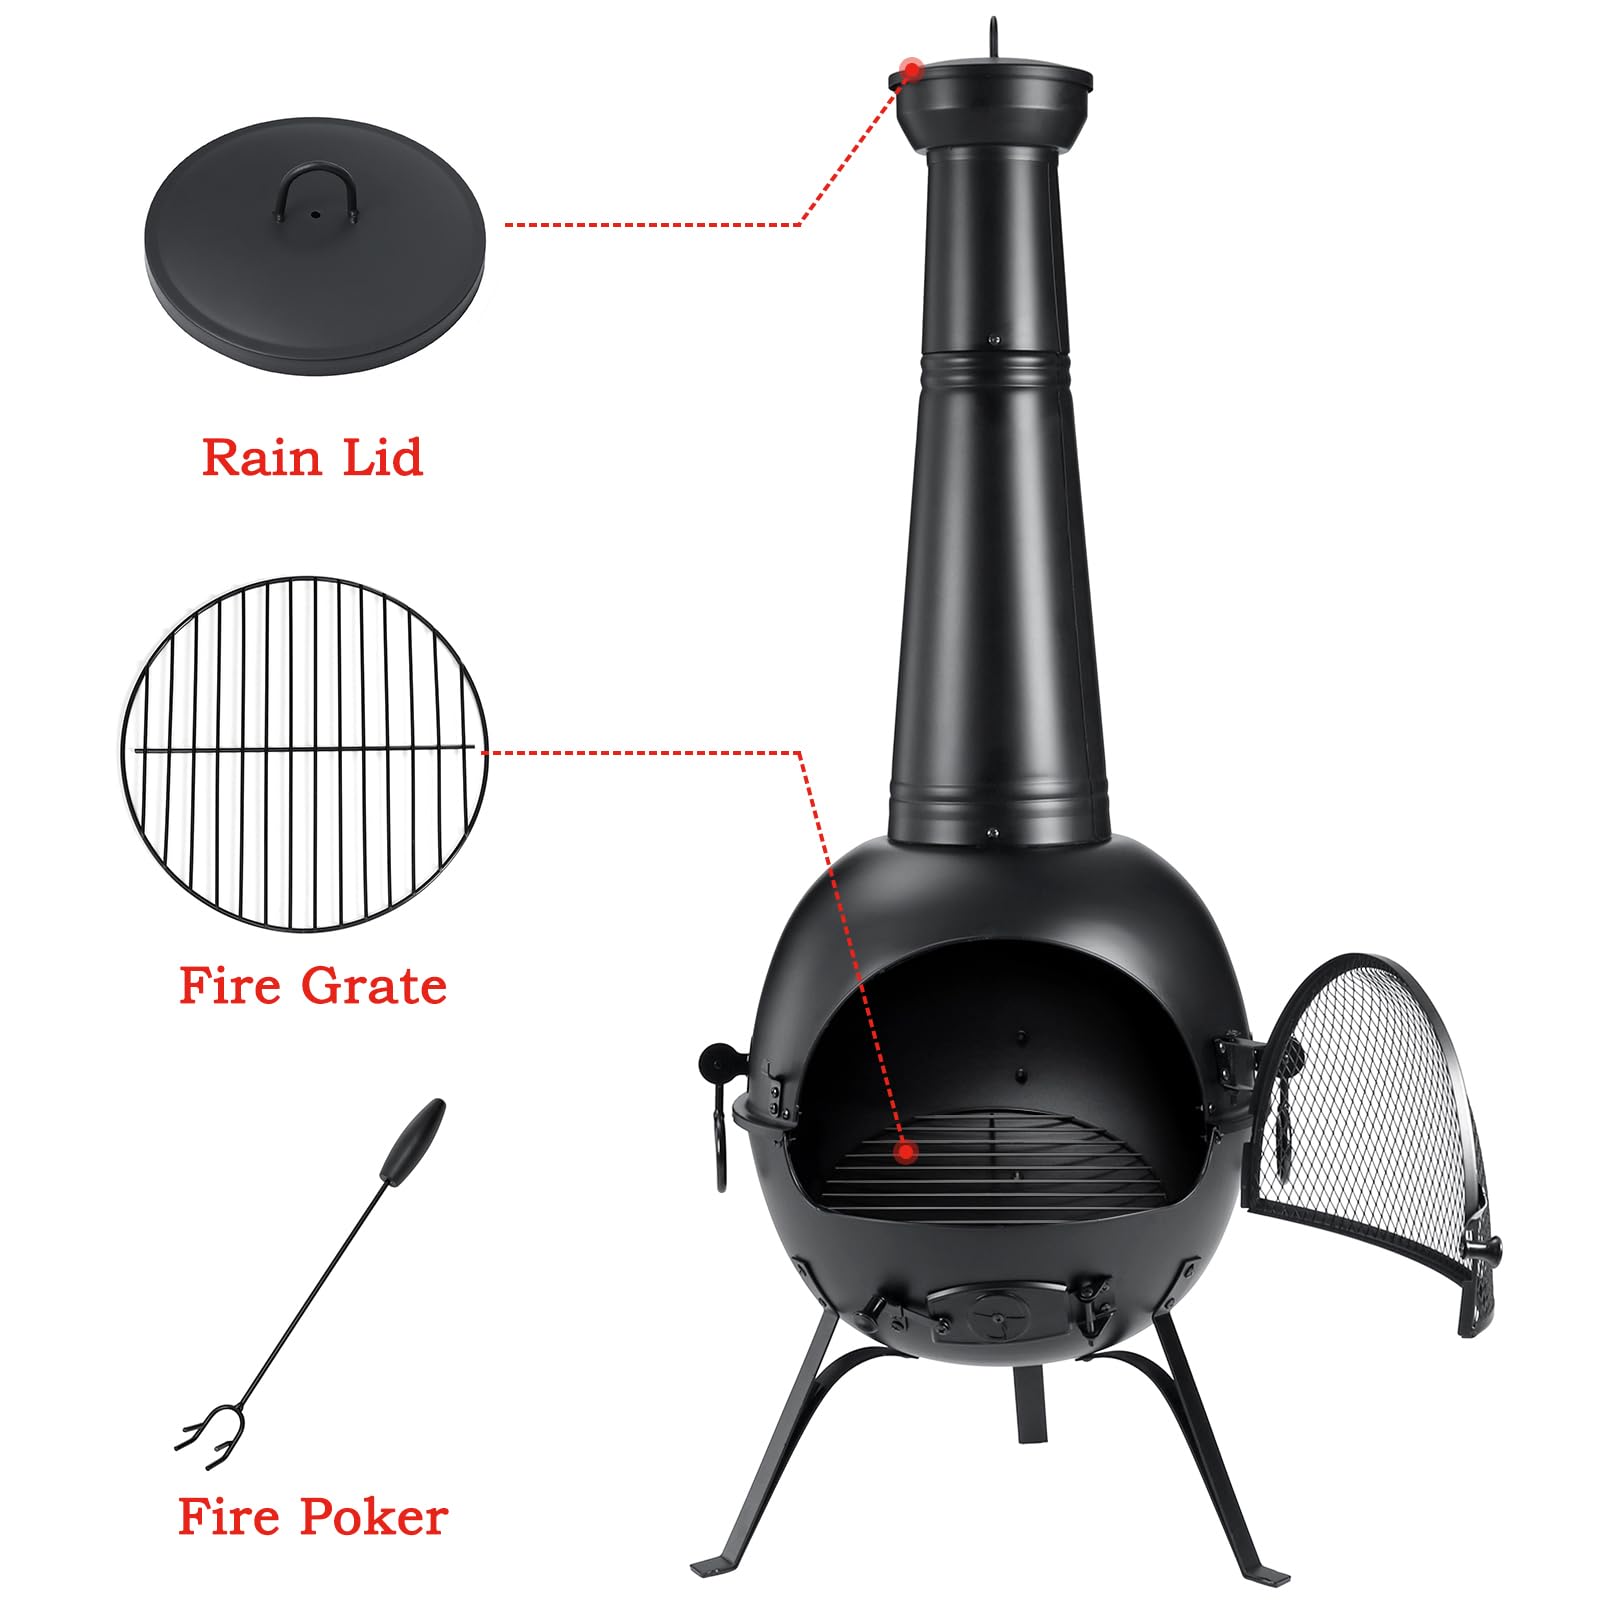 SINGLYFIRE Prairie Fire Outdoor Chiminea Fireplace Deck or Patio Backyard Wooden Fire Pit with Chiminea Cover Rust-Free Iron Black